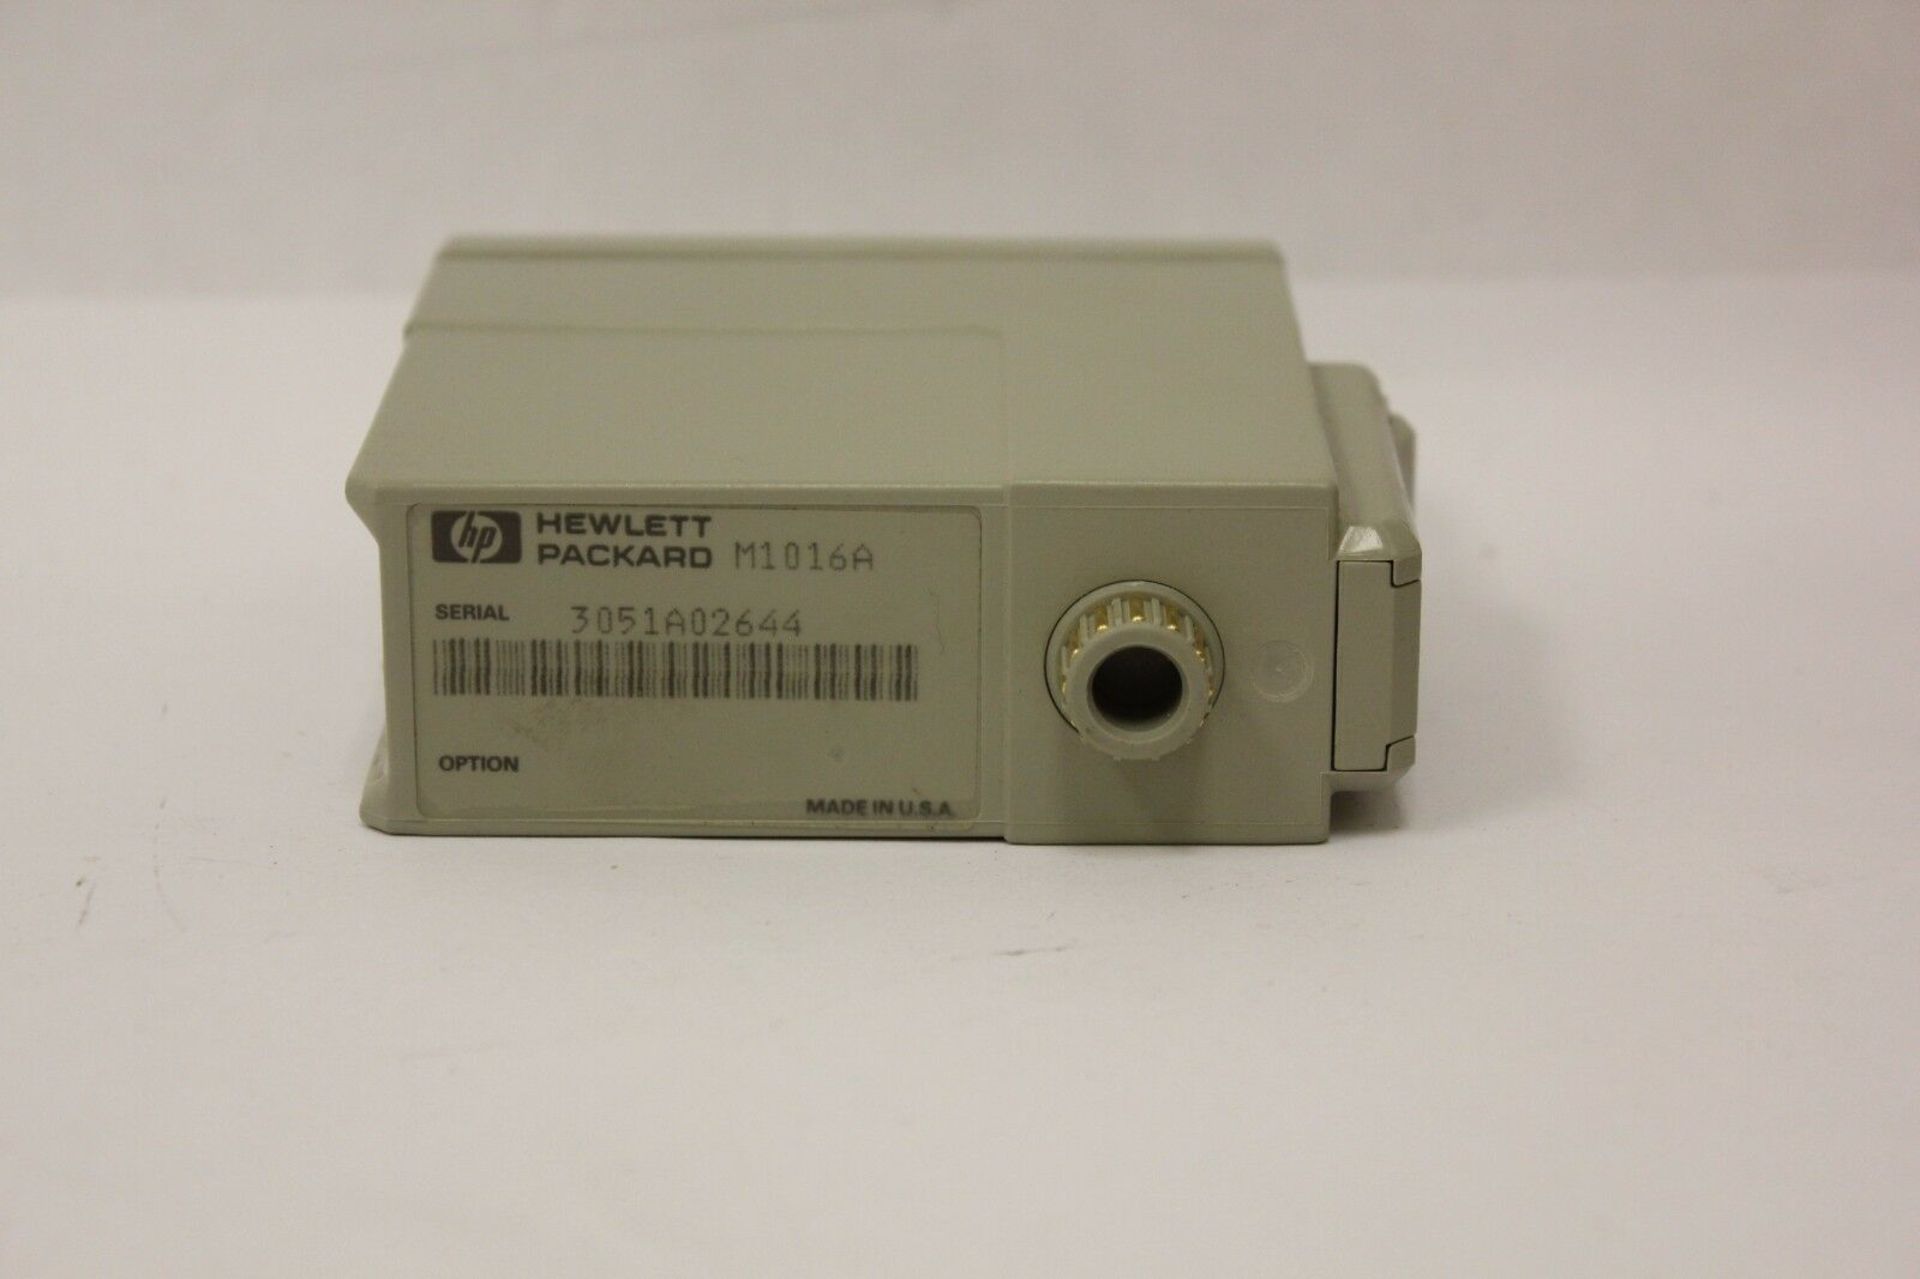 HP Phillips M1016A CO2 Module - Image 2 of 2